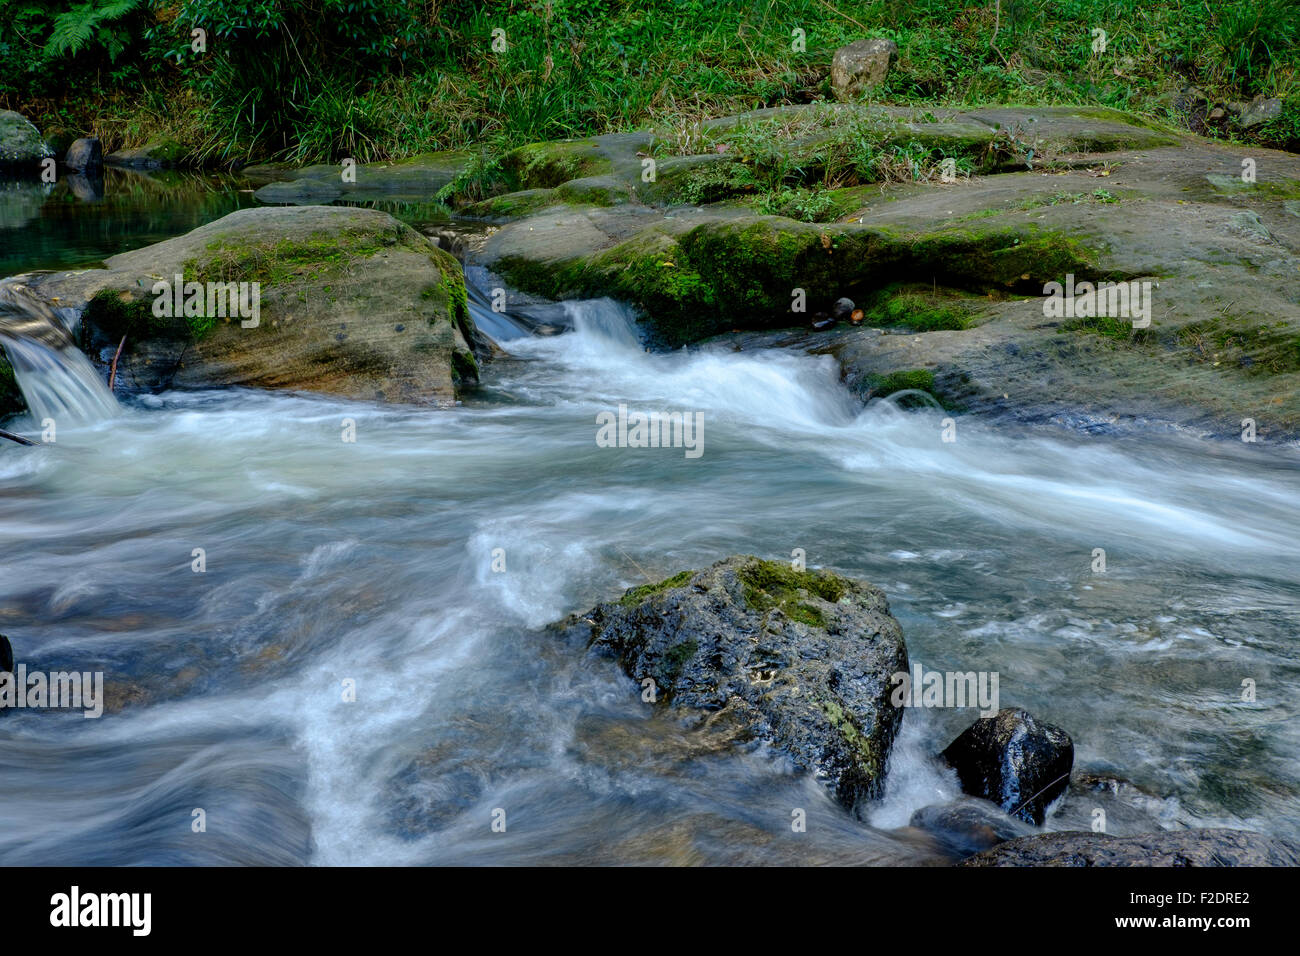 Sul Fiume Nerang a Lione Crossing, Numinbah Valley Foto Stock